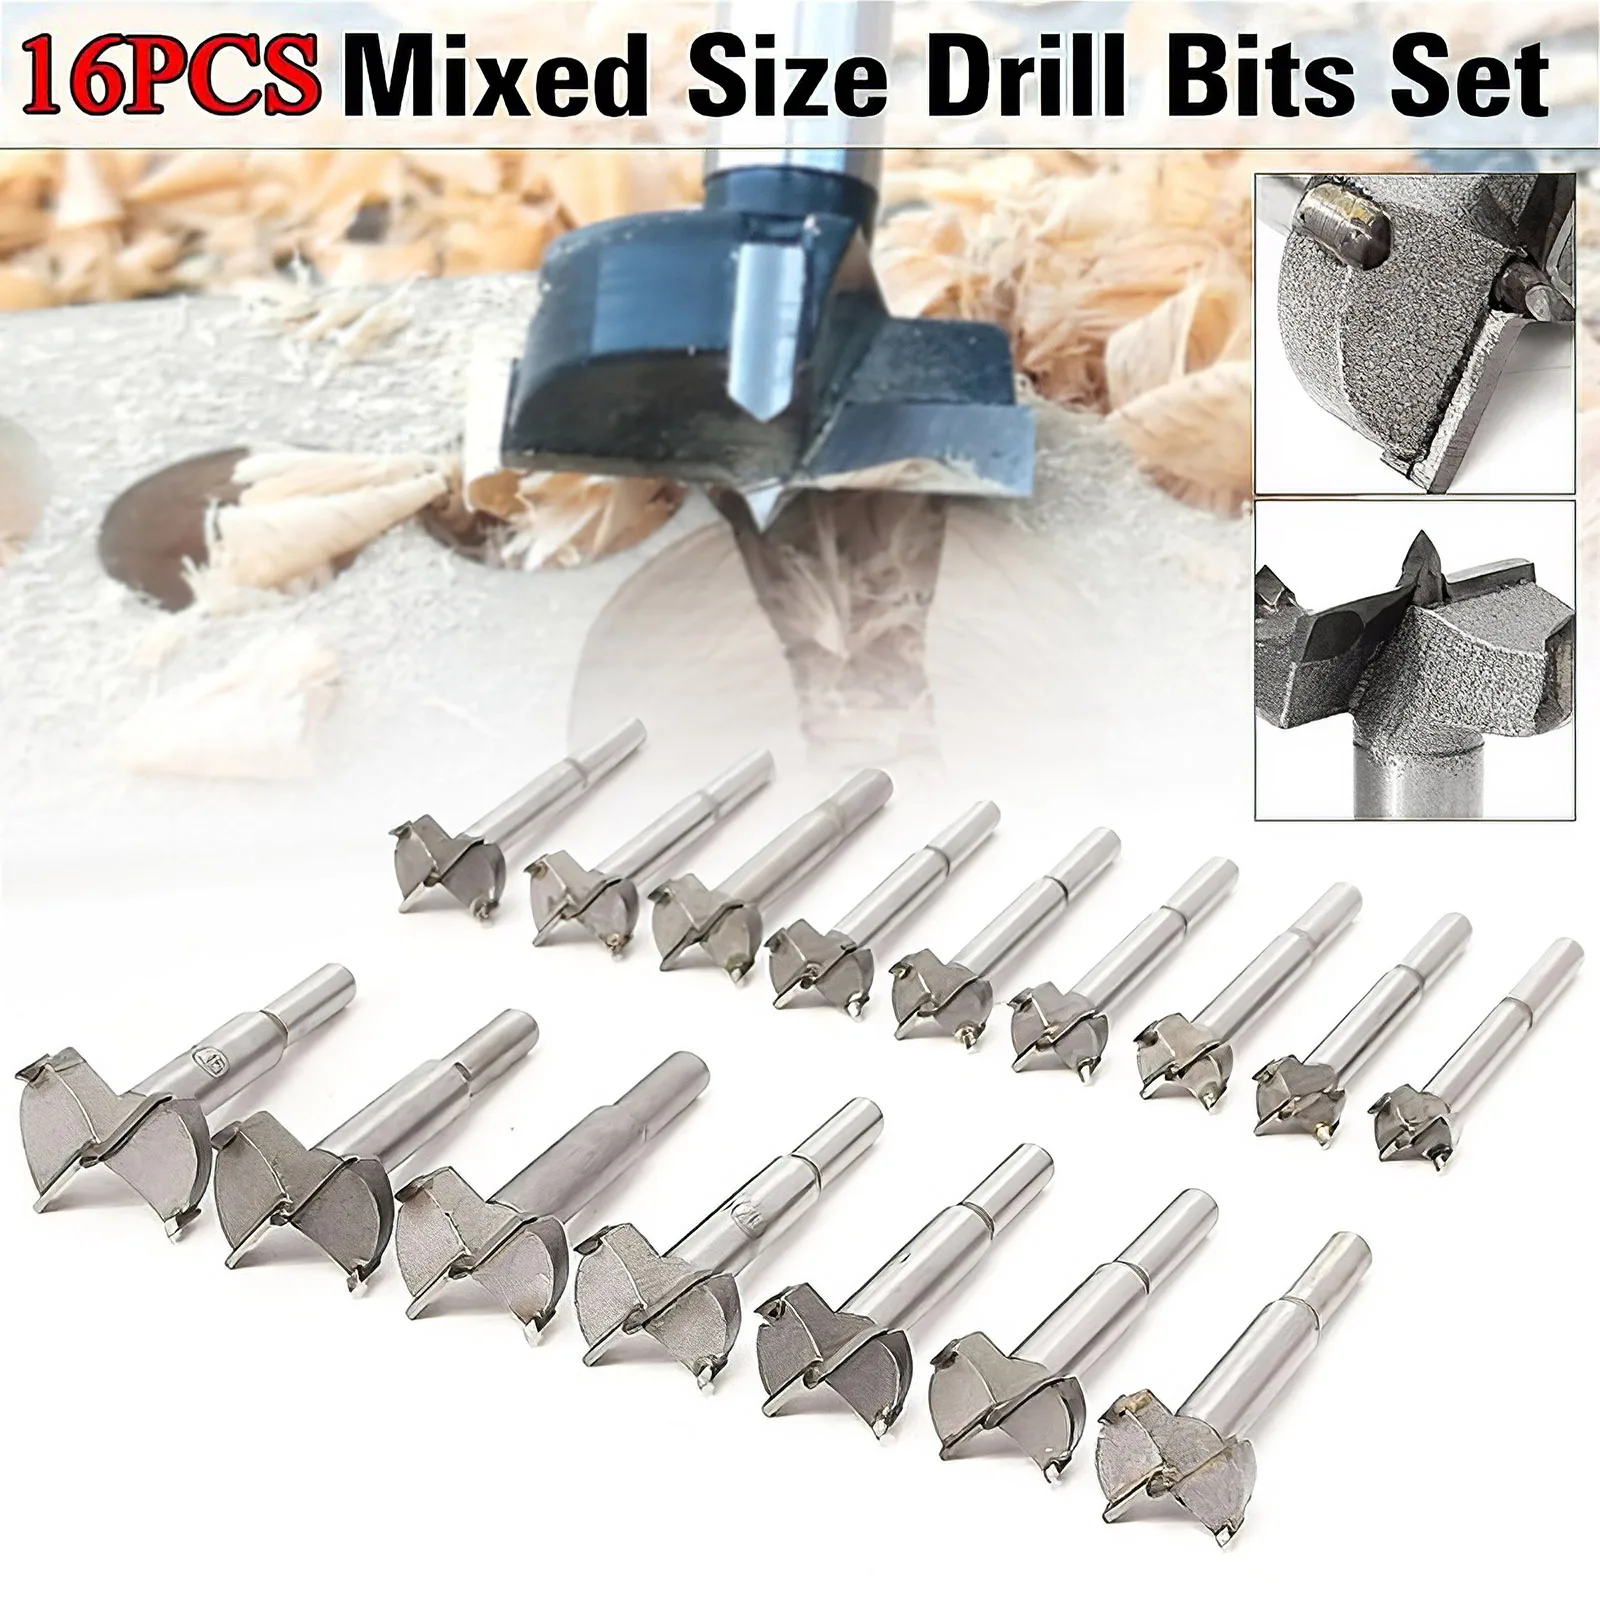 

16pcs15-35mm Multifunctional Woodworking Drill Bit Self Centering Hole Saw Cutter Hole Drilling Tools Forstner High Hardness Dri